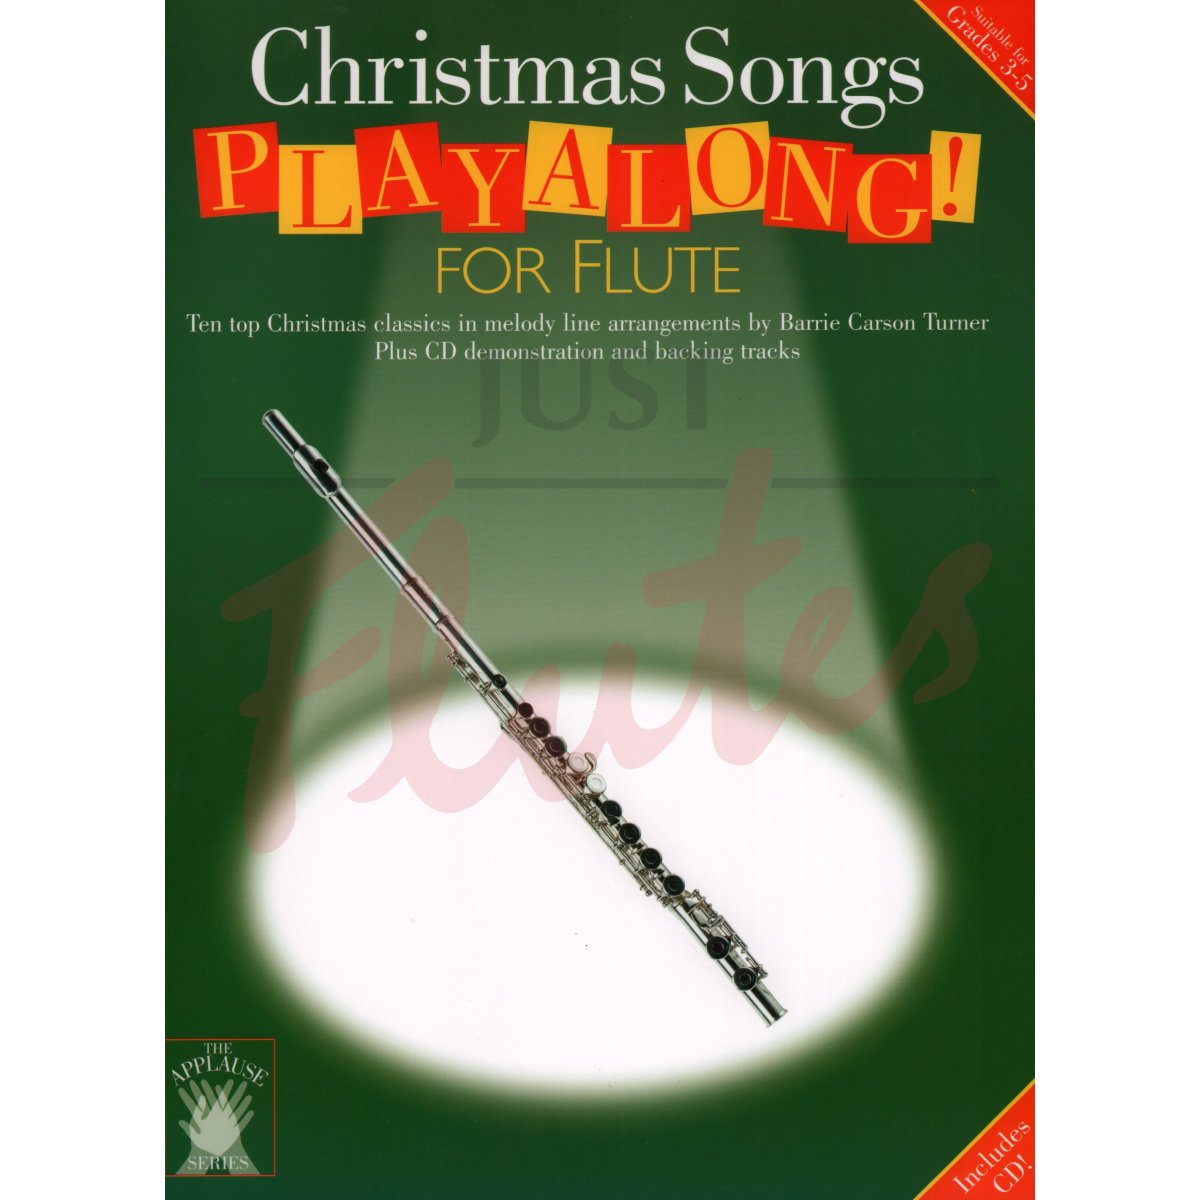 Christmas Songs Playalong! for Flute